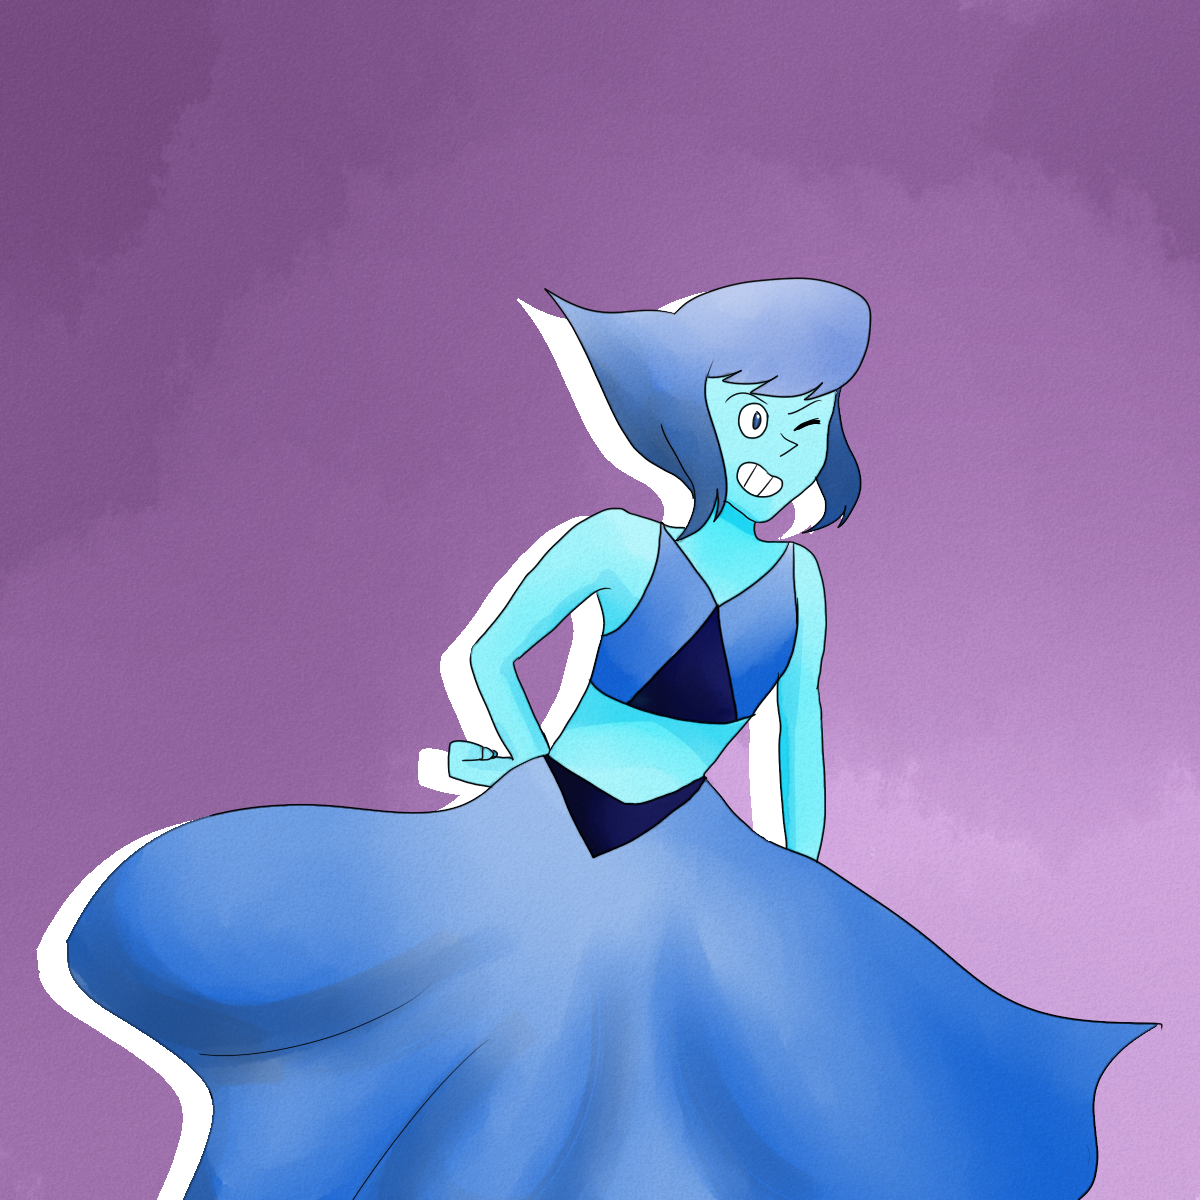 Lapis in an uncharacteristic pose. Because she can.